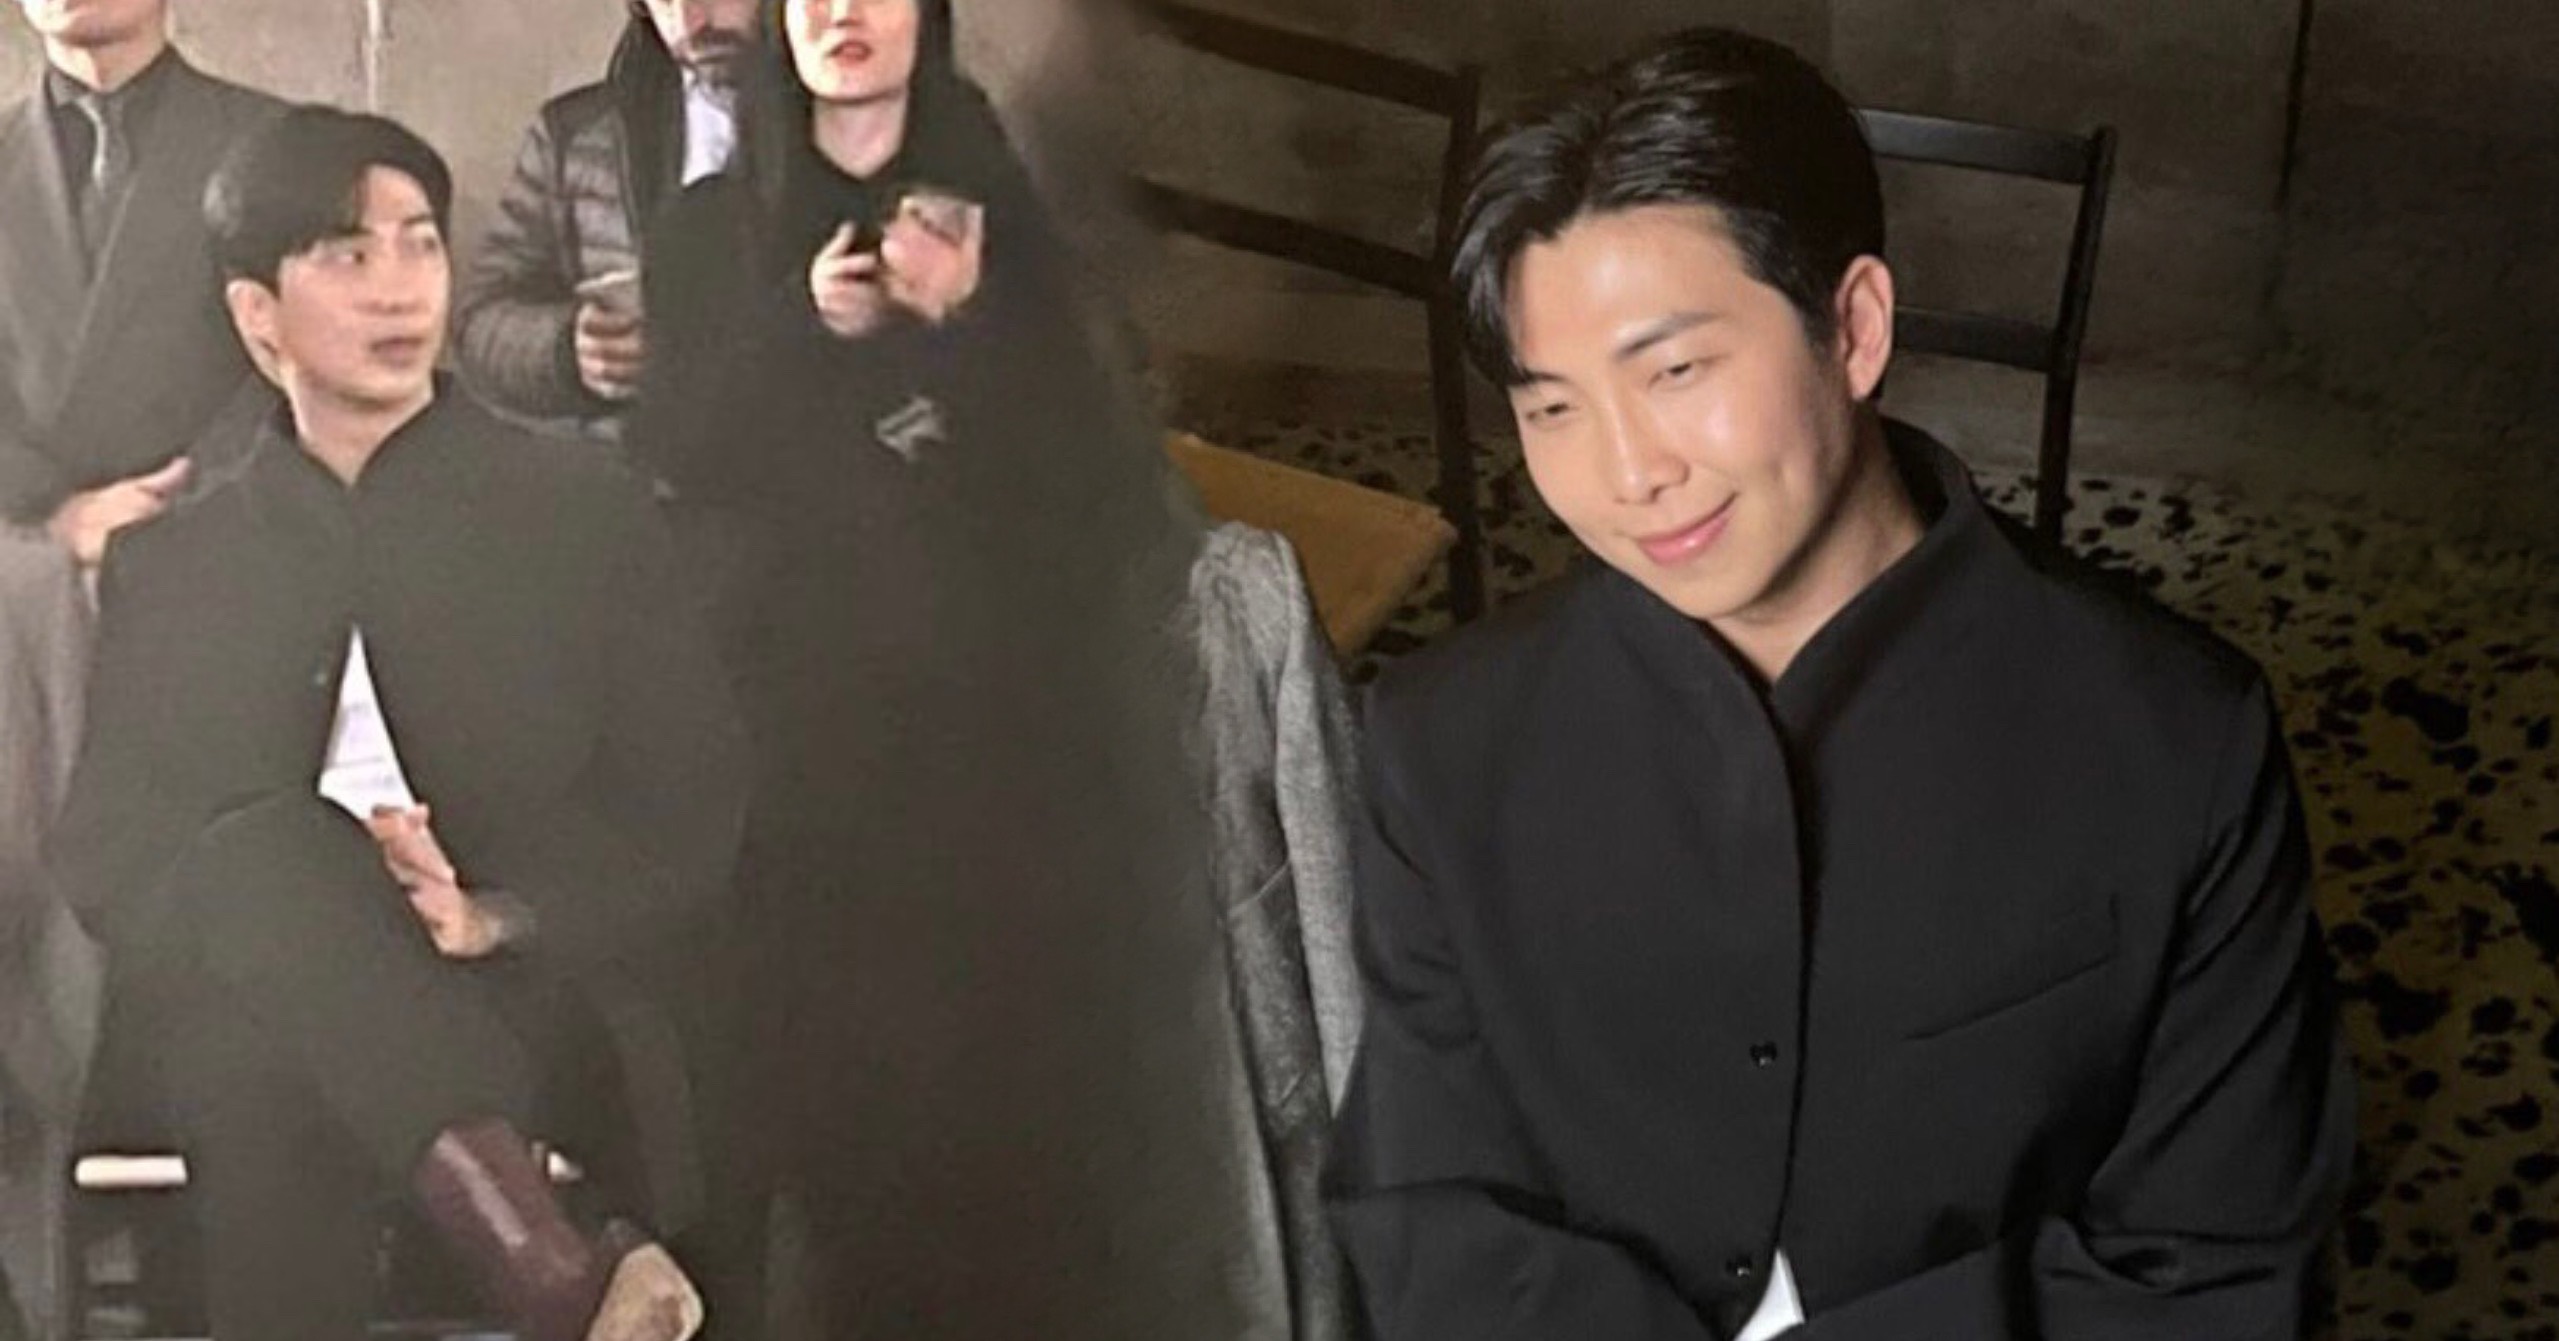 BTS' RM made his debut appearance at the Bottega Veneta FW 2023 show in  Milan. He was seated next to American singer Kelela in the front…